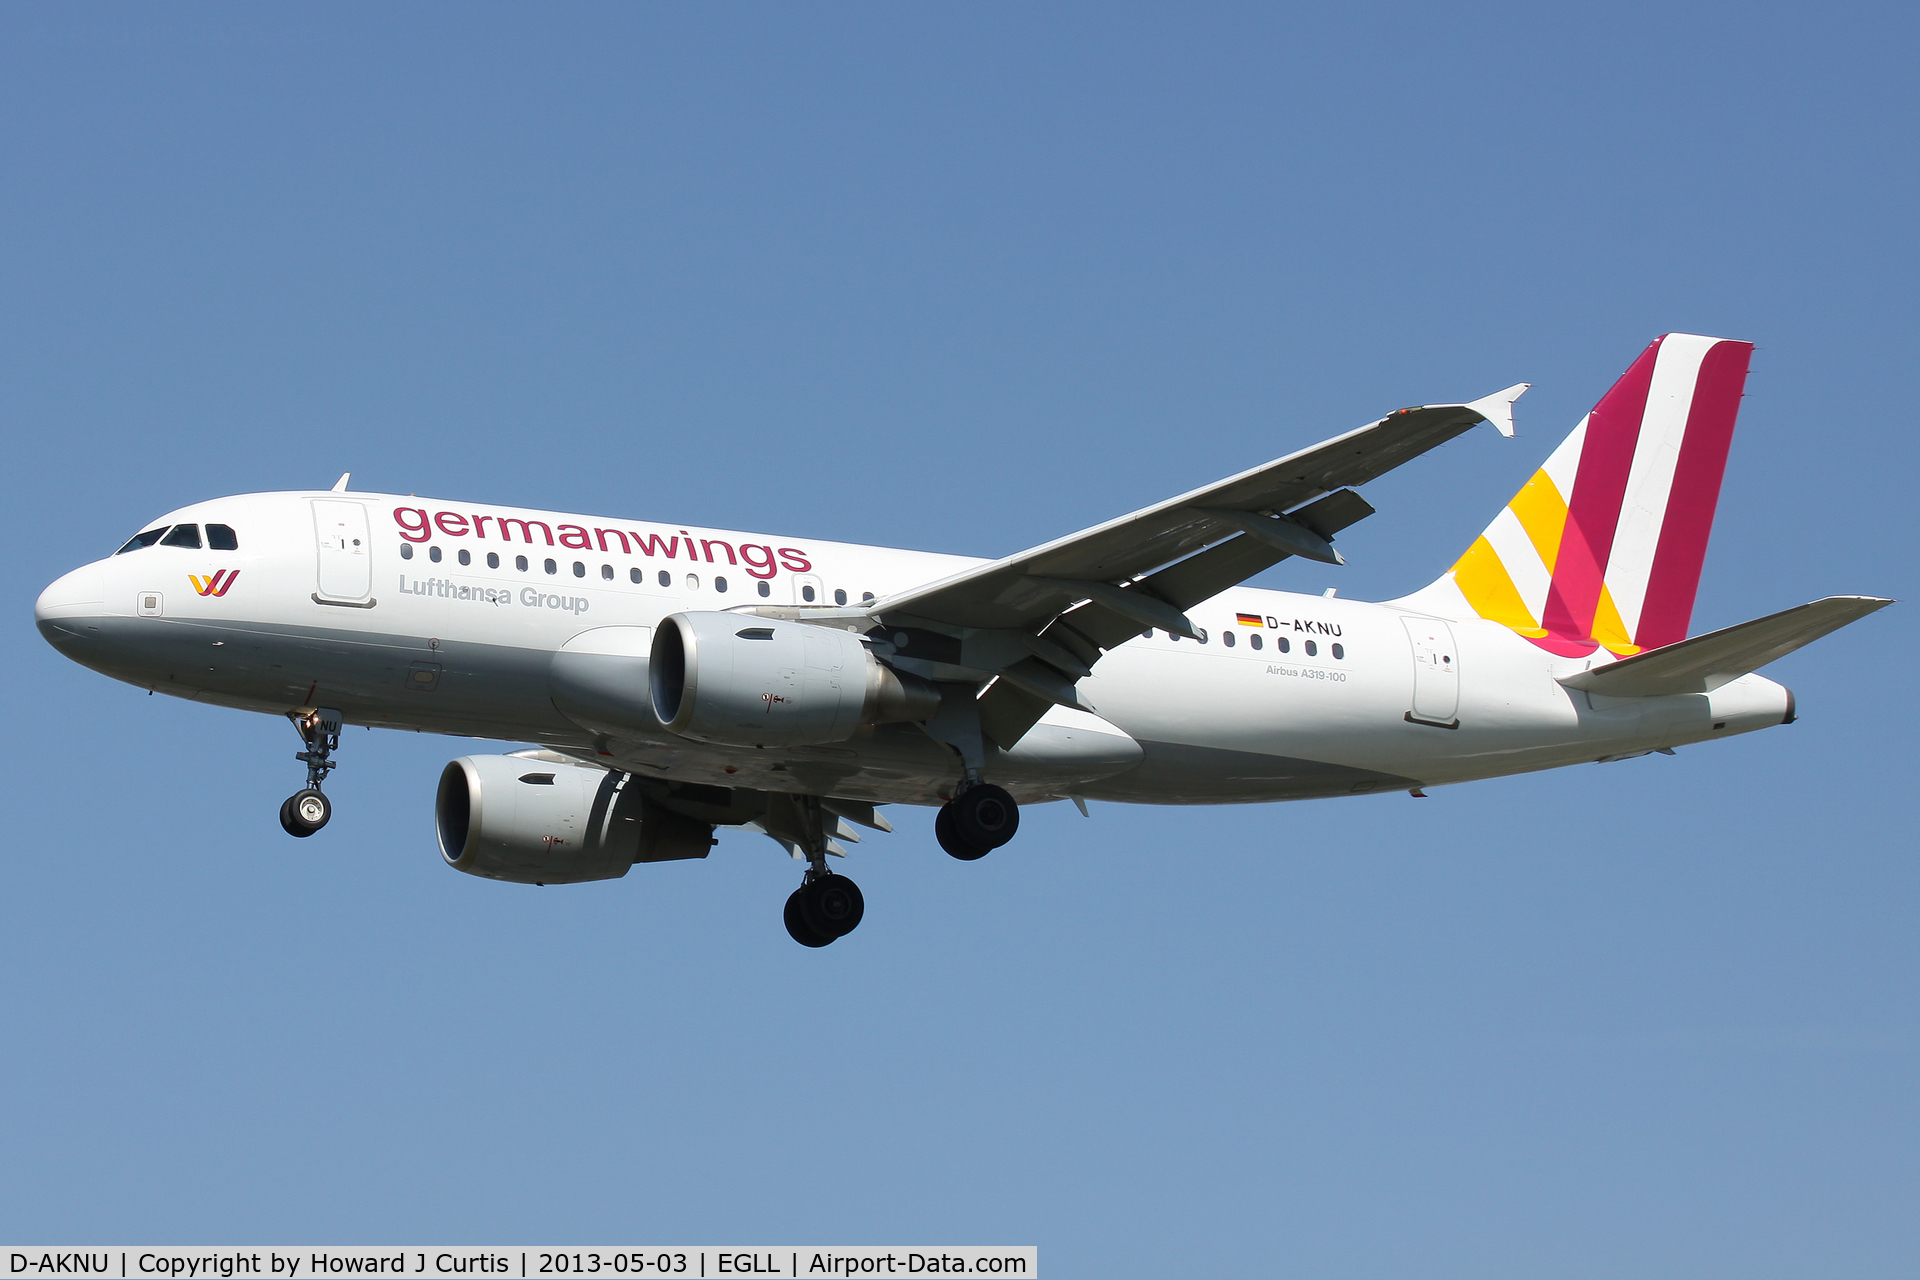 D-AKNU, 2005 Airbus A319-112 C/N 2628, Germanwings (new colours), on approach to runway 27L.